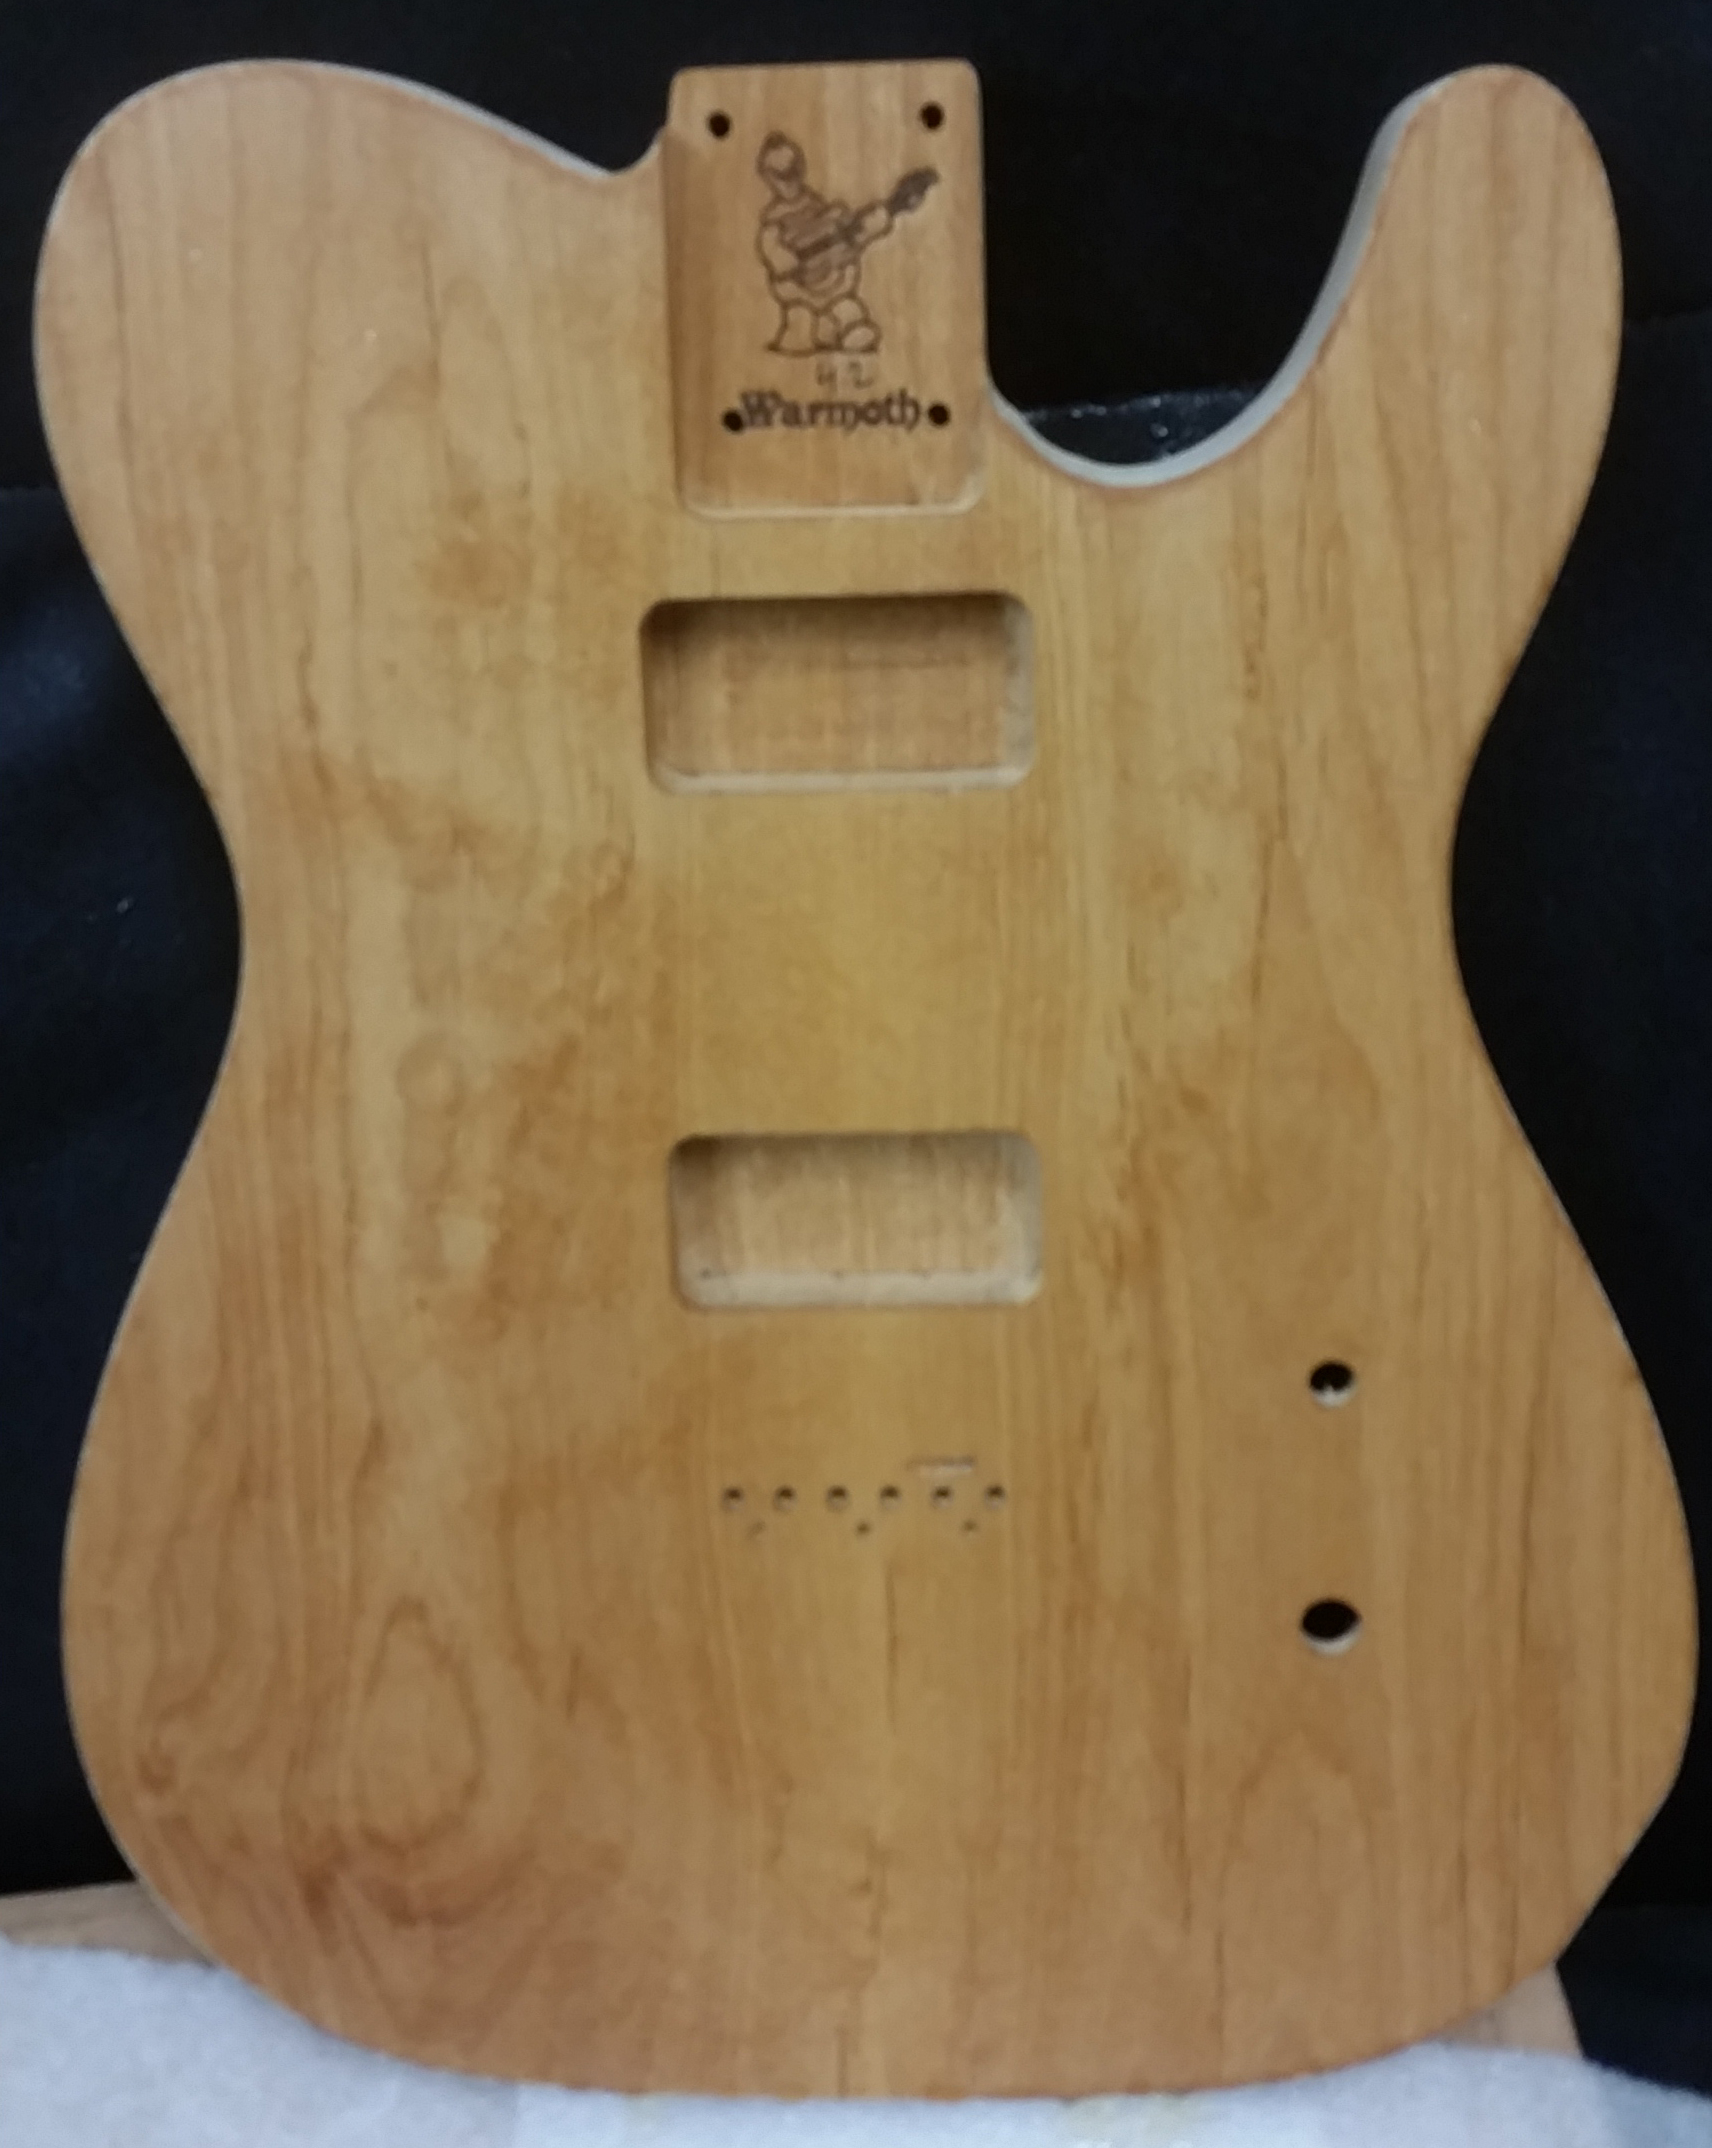 Fender Telecaster Cabronita body by Warmoth, view of front, wet